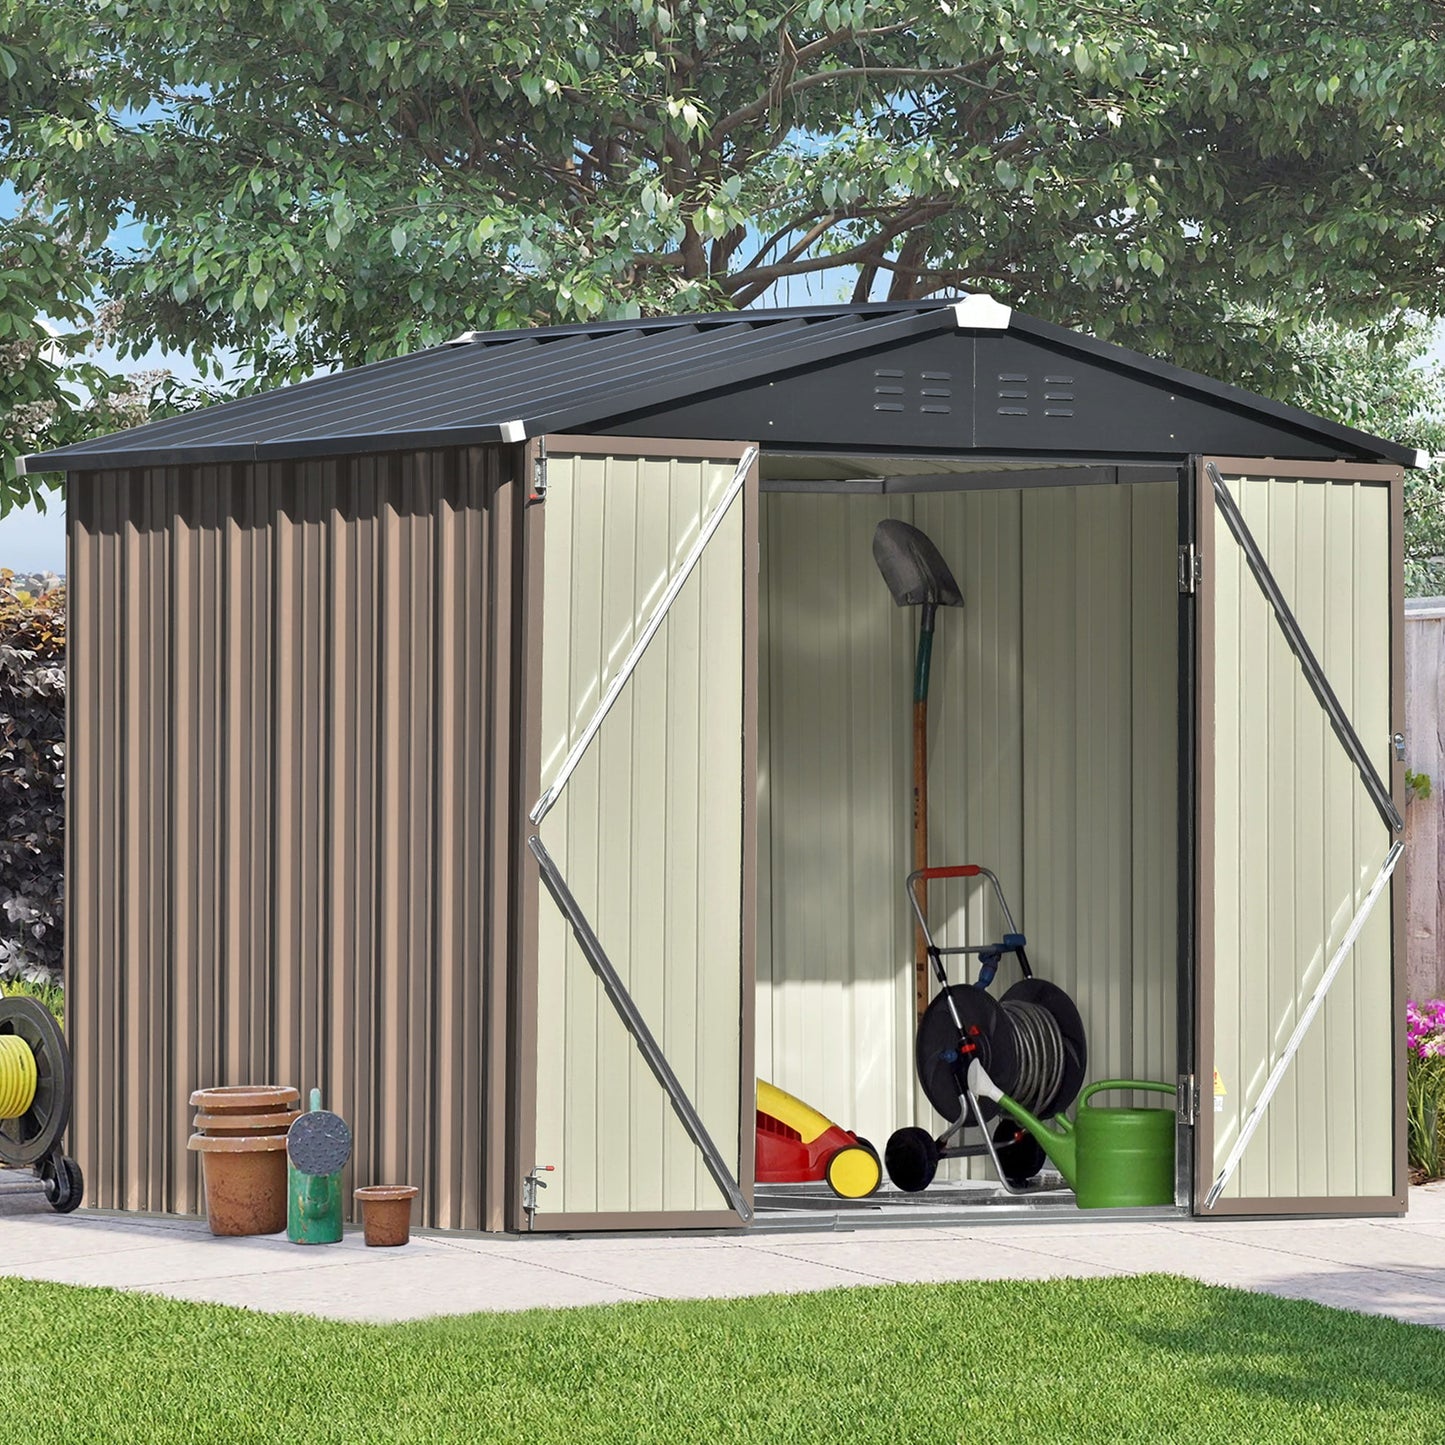 Outdoor Shed Storage Cabinet, 8FT X 6FT Garden Storage Shed Metal with Lockable Doors, Outside Vertical Shed Bike Shed